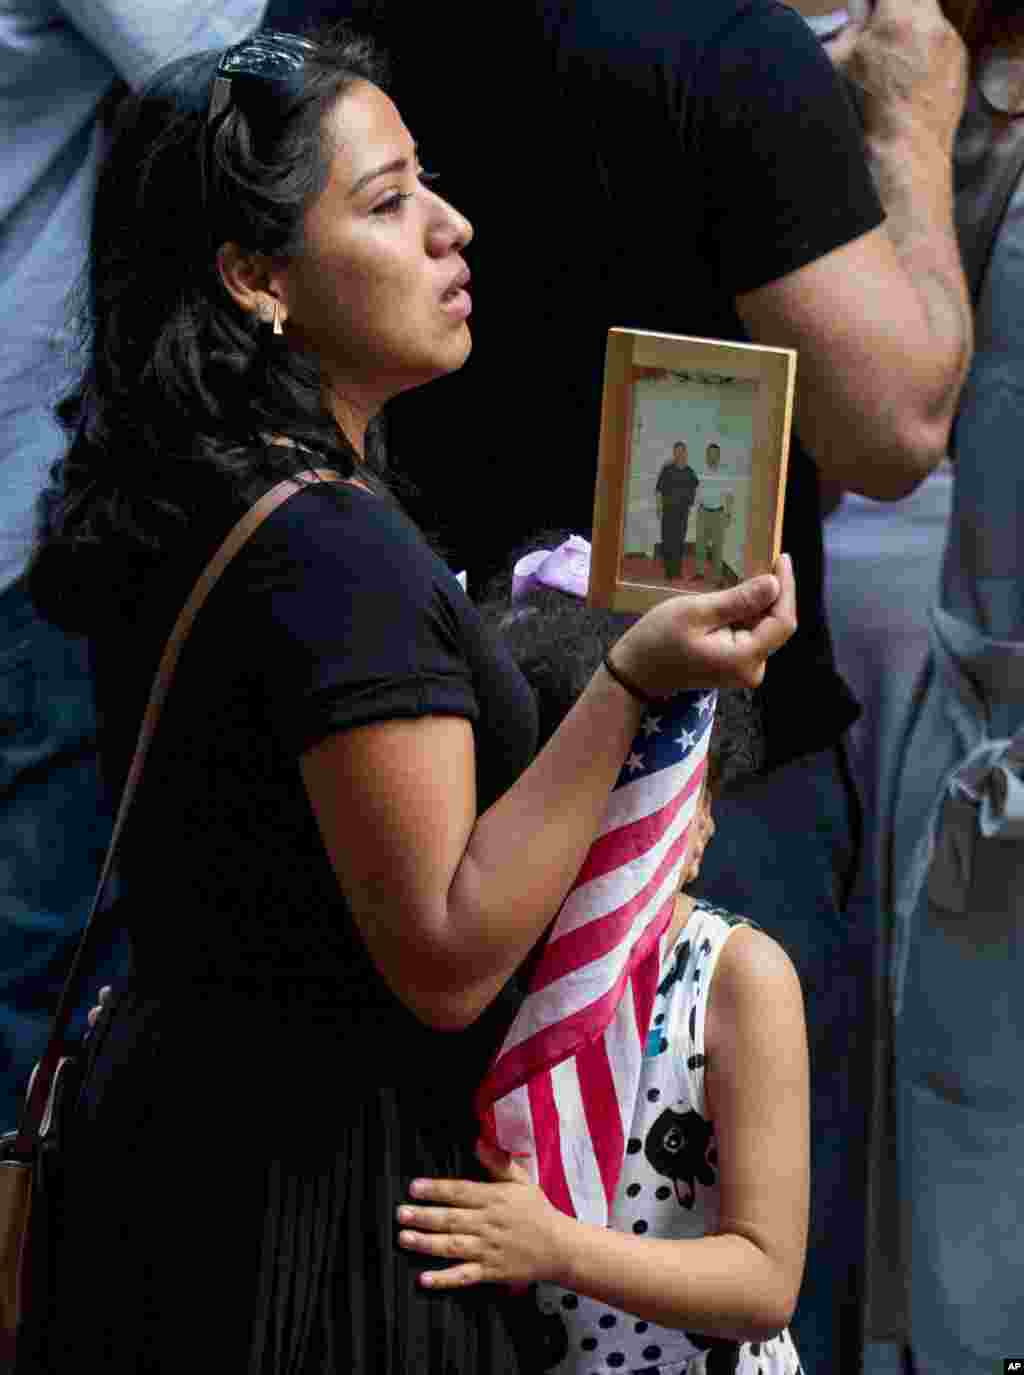 A woman becomes emotional during a moment of silence in a ceremony for the 15th anniversary of the attacks of the World Trade Center at the National September 11 Memorial, in New York, Sept. 11, 2016.